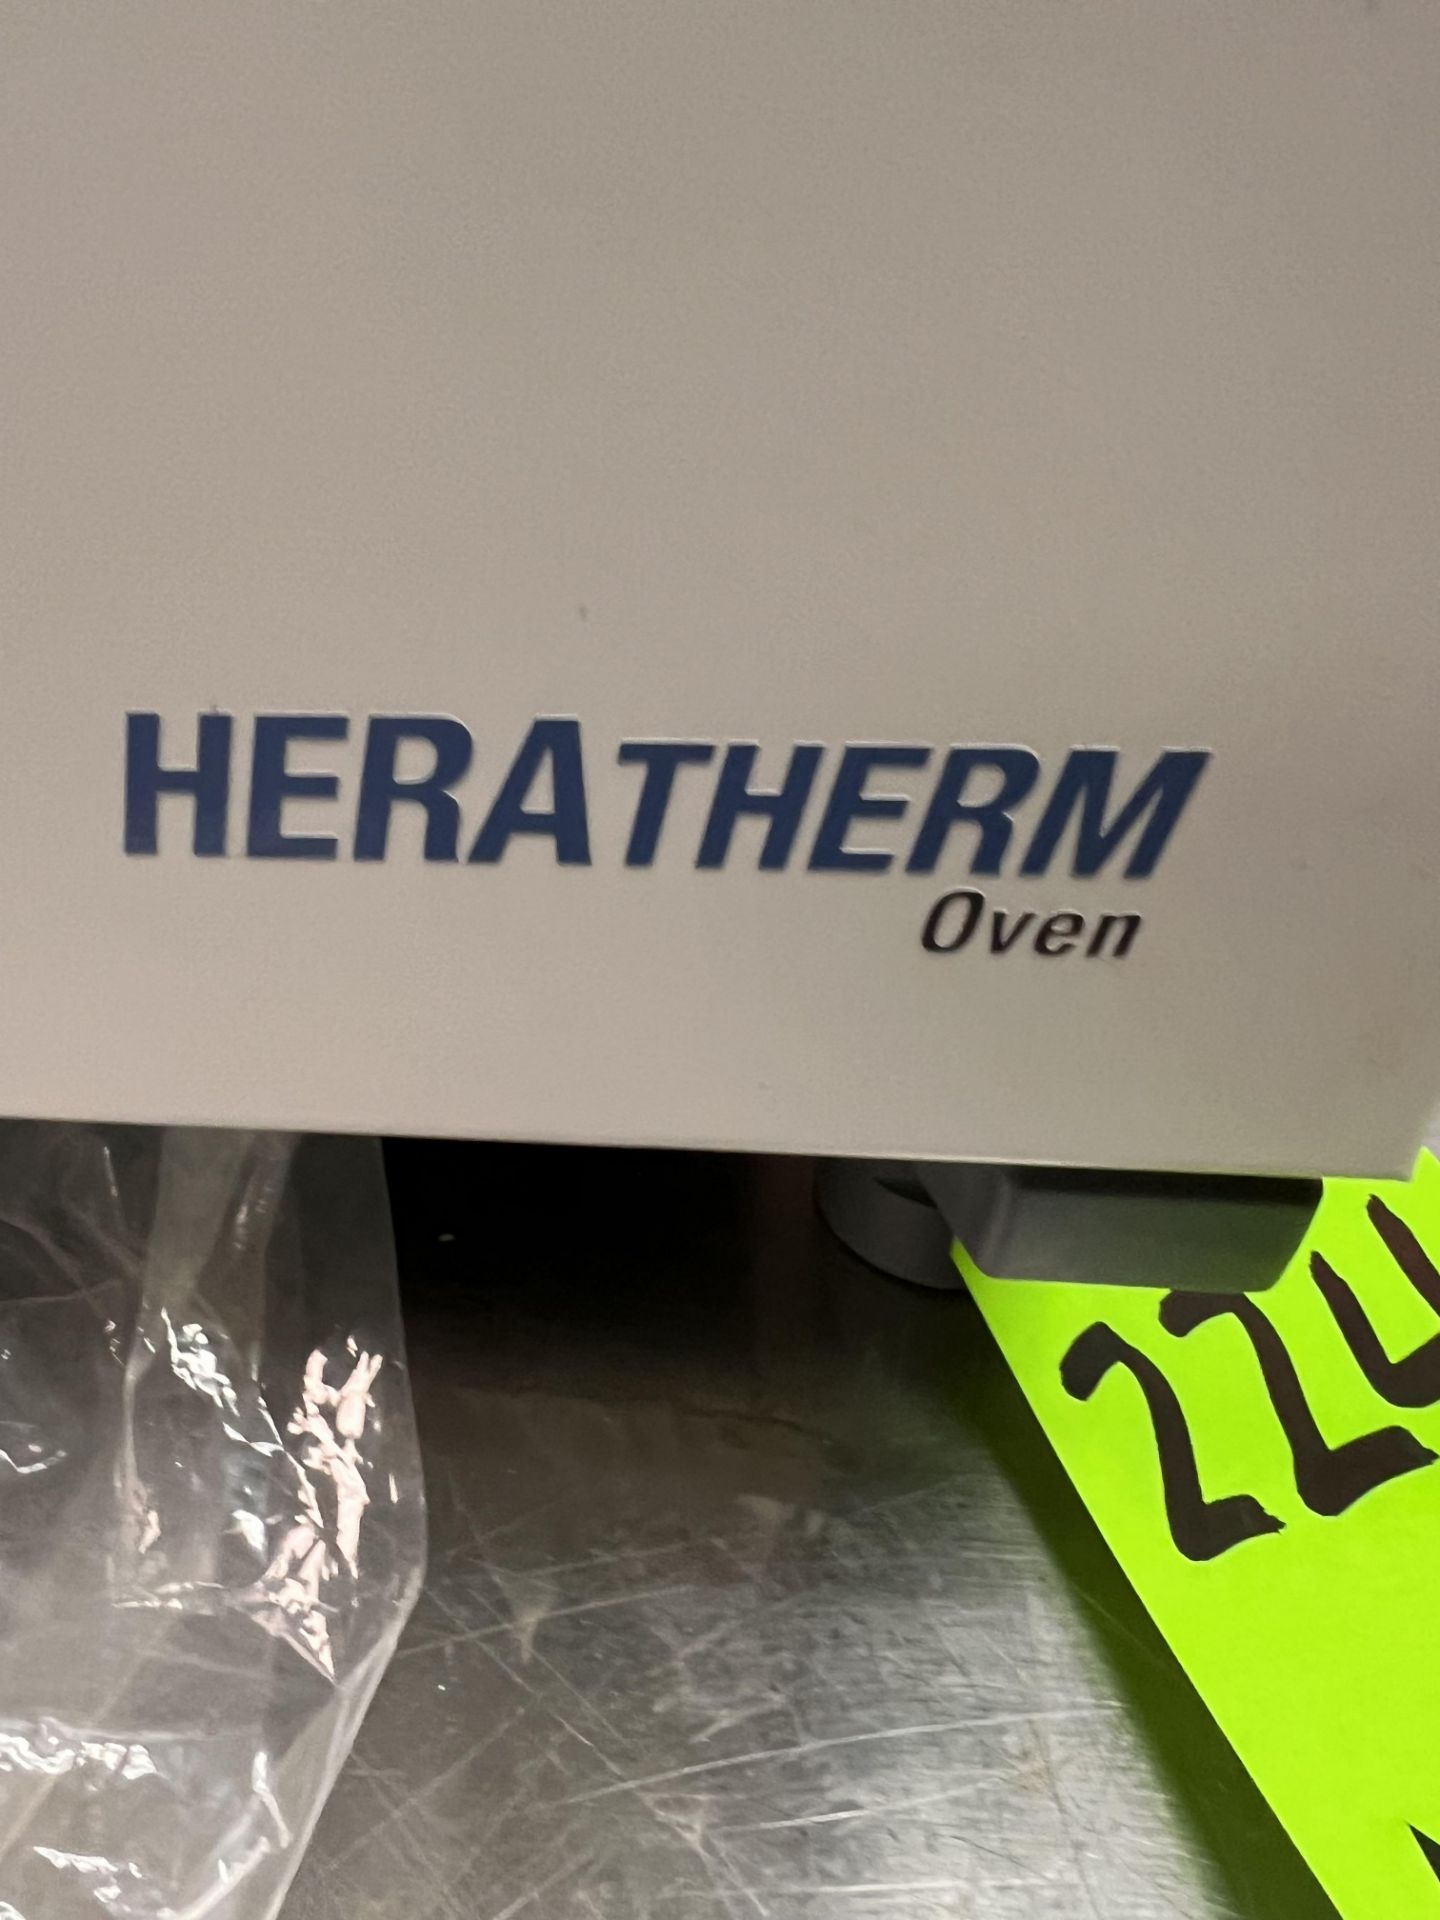 2021 THERMO SCIENTIFIC HERATHERM OGS60 LAB OVEN, MODEL HERATHERM OGS60, S/N 42814402 - Image 2 of 6